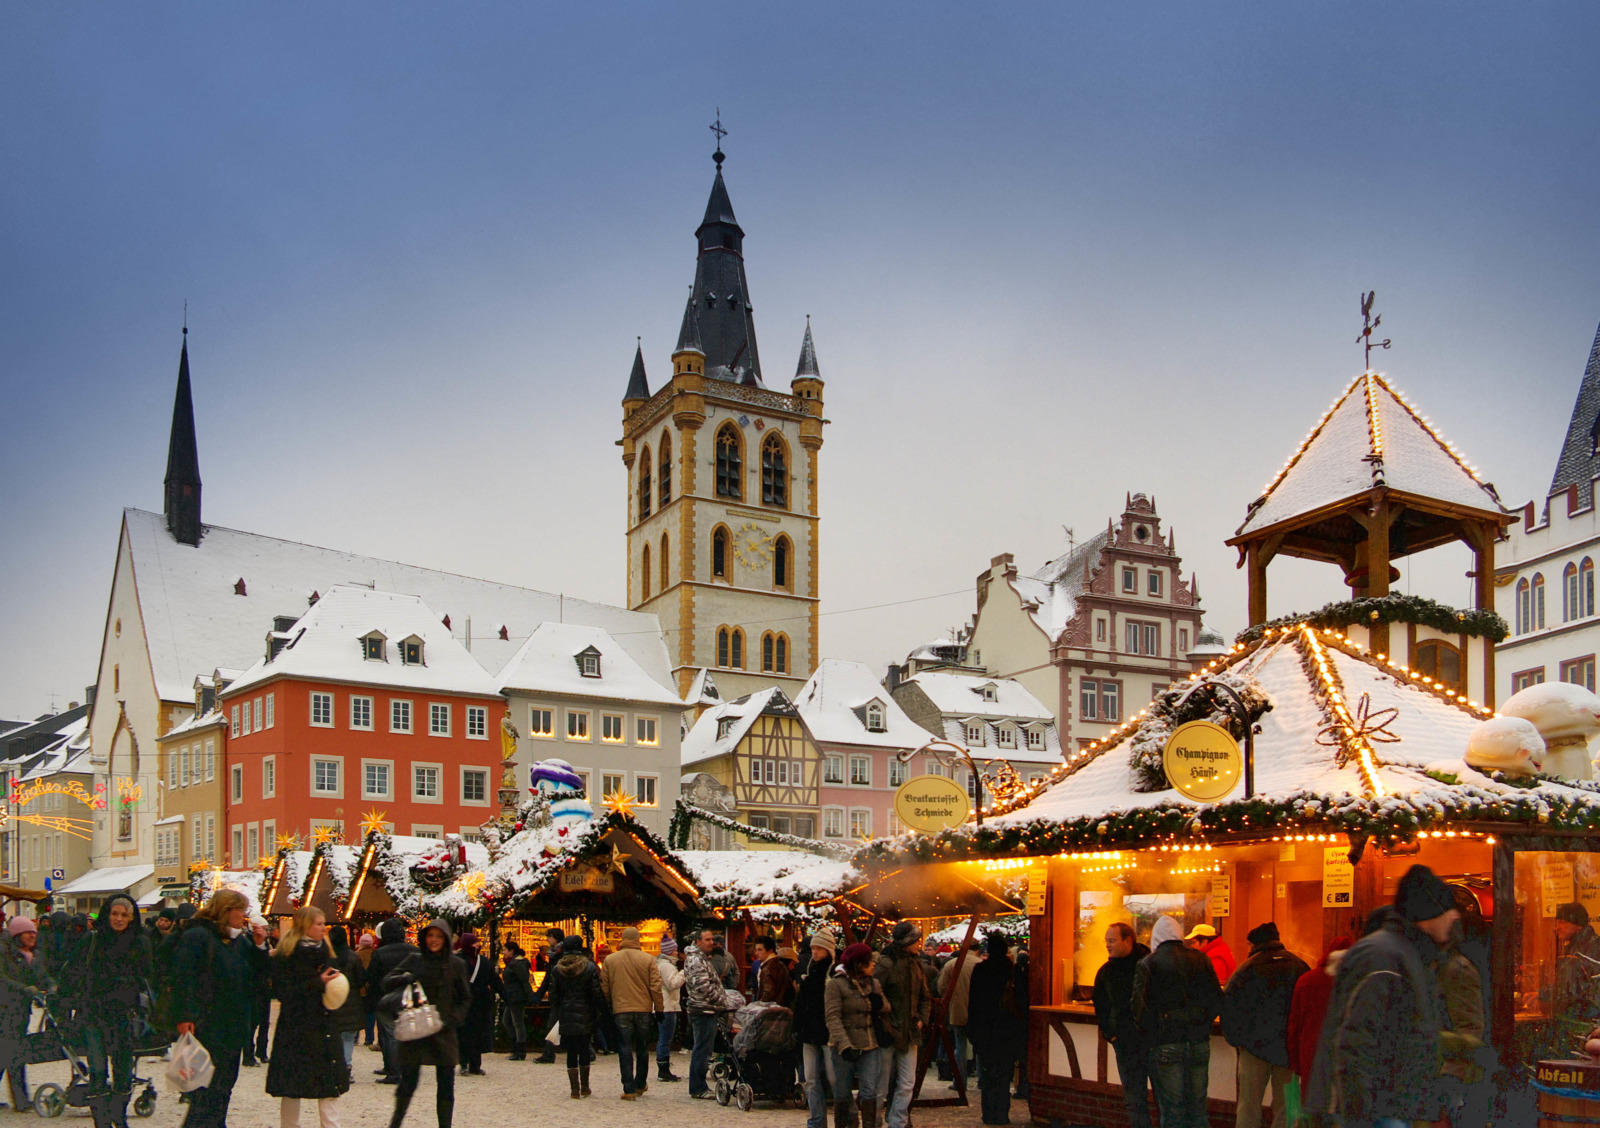 Christmas markets in Germany - Trier Weihnachtsmarkt © Berthold Werner - licence [CC BY-SA 3.0] from Wikimedia Commons